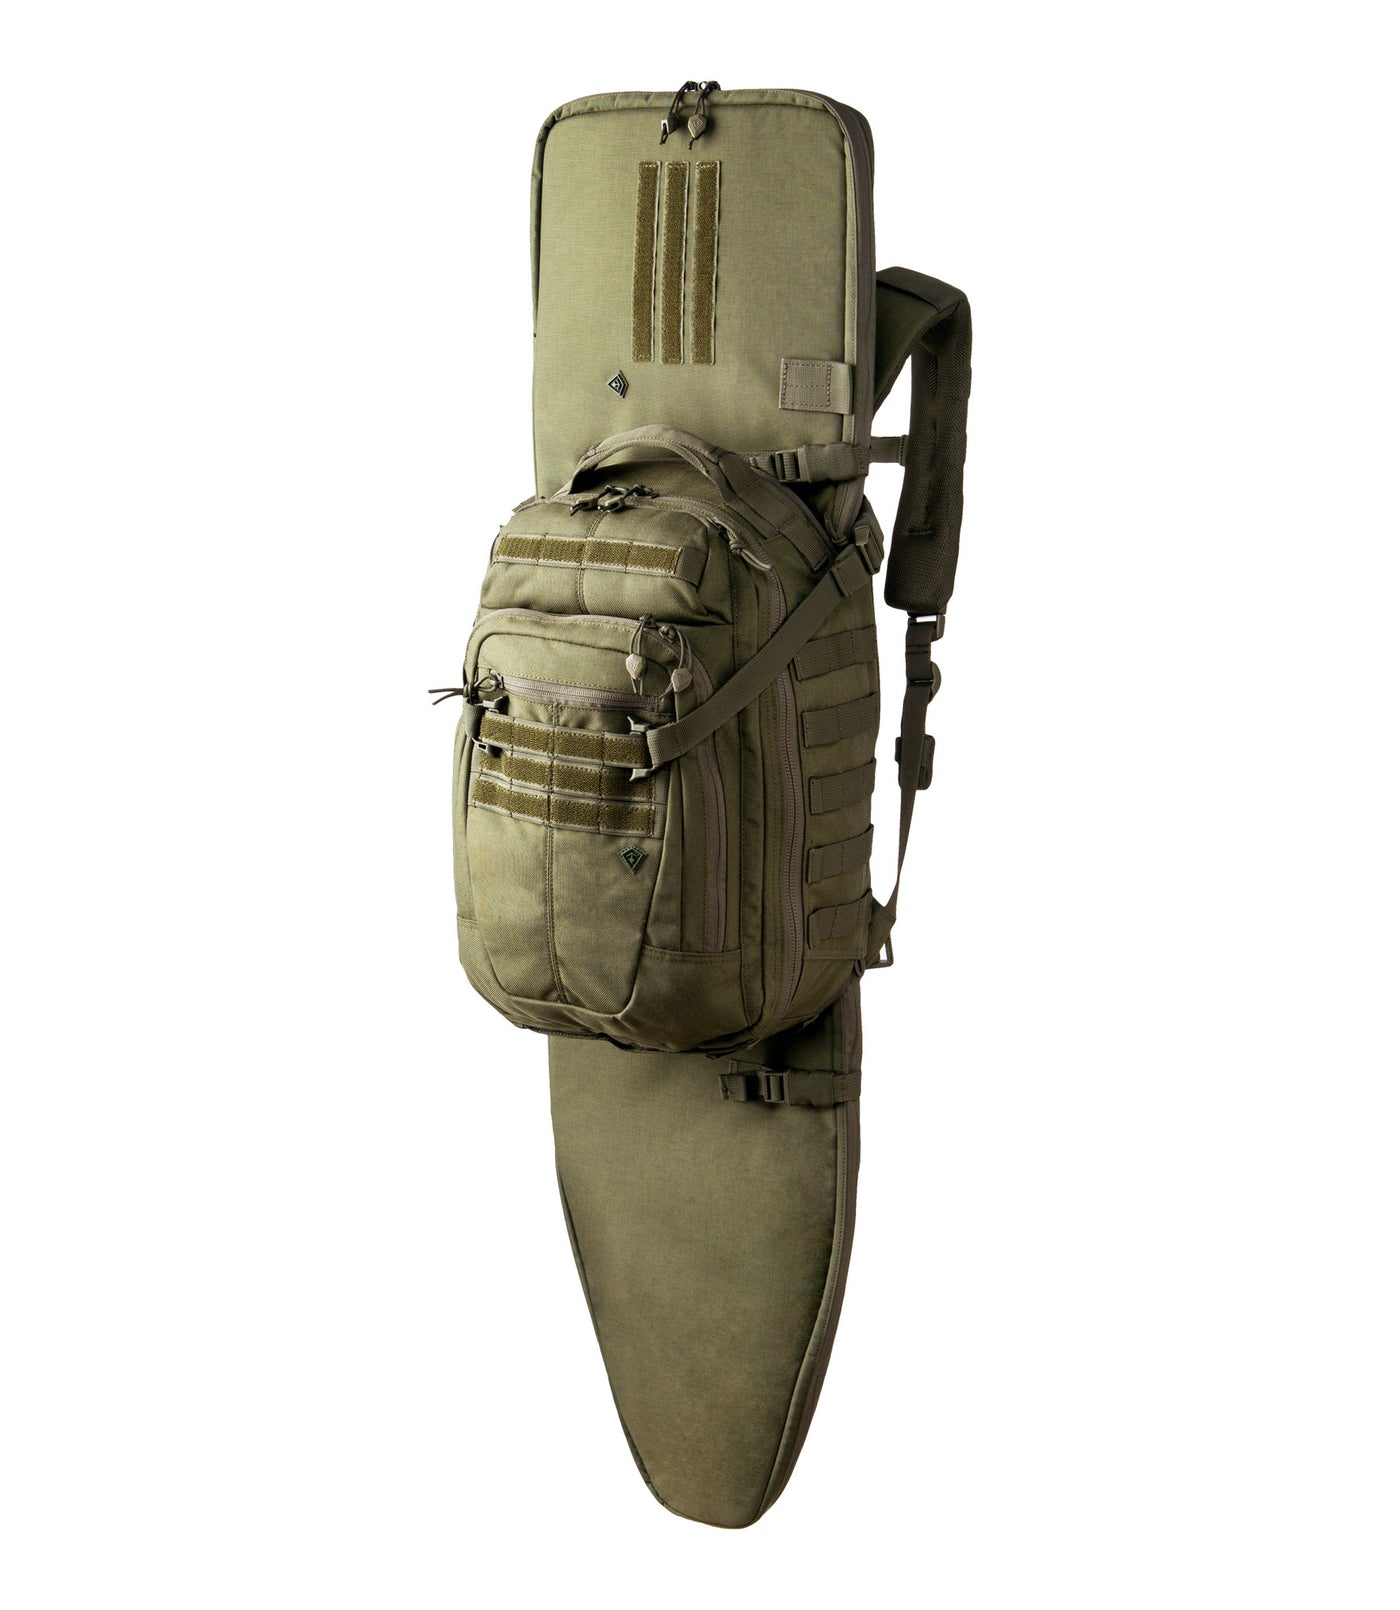 Specialist Half-Day Backpack 25L in OD Green with Rifle Sleeve